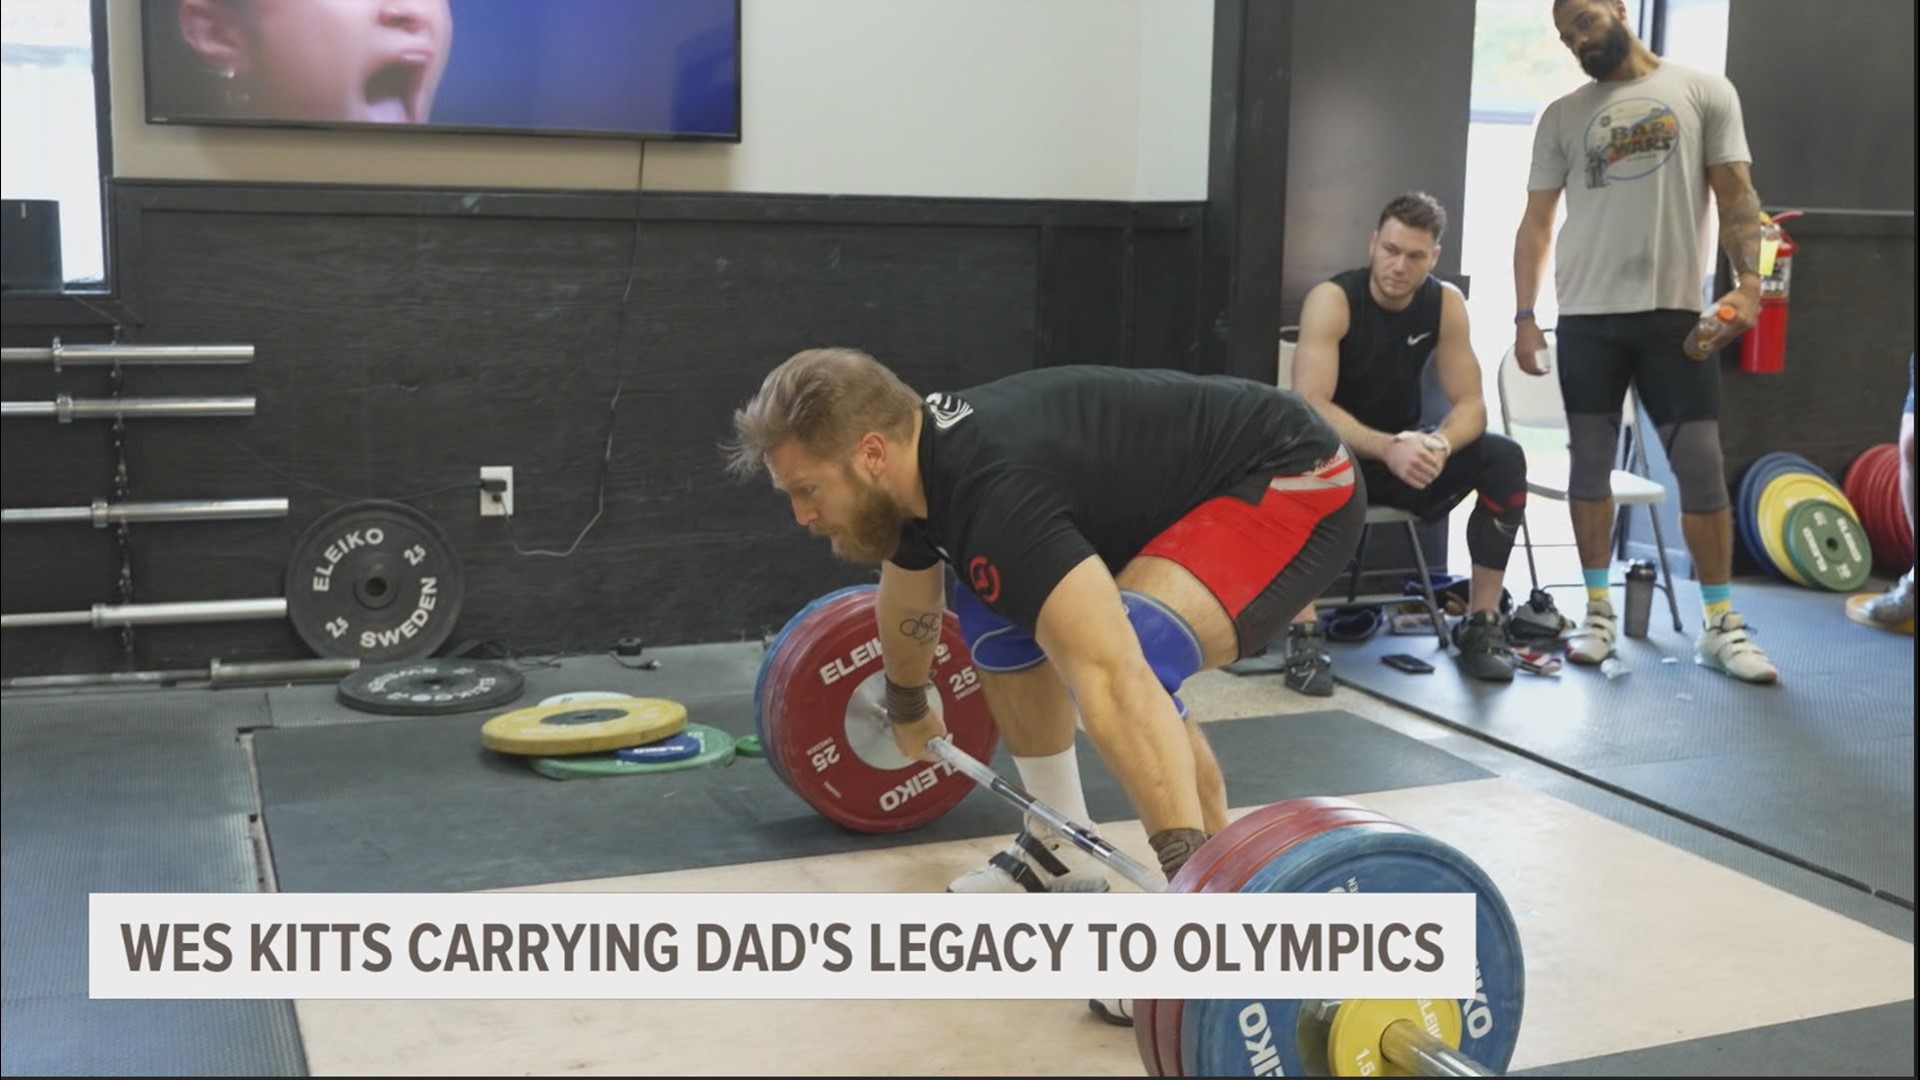 When Wes Kitts was 21 years old, his father died. The Olympic weightlifter will carry his dad's legacy to the biggest stage in sports for the second time in July.